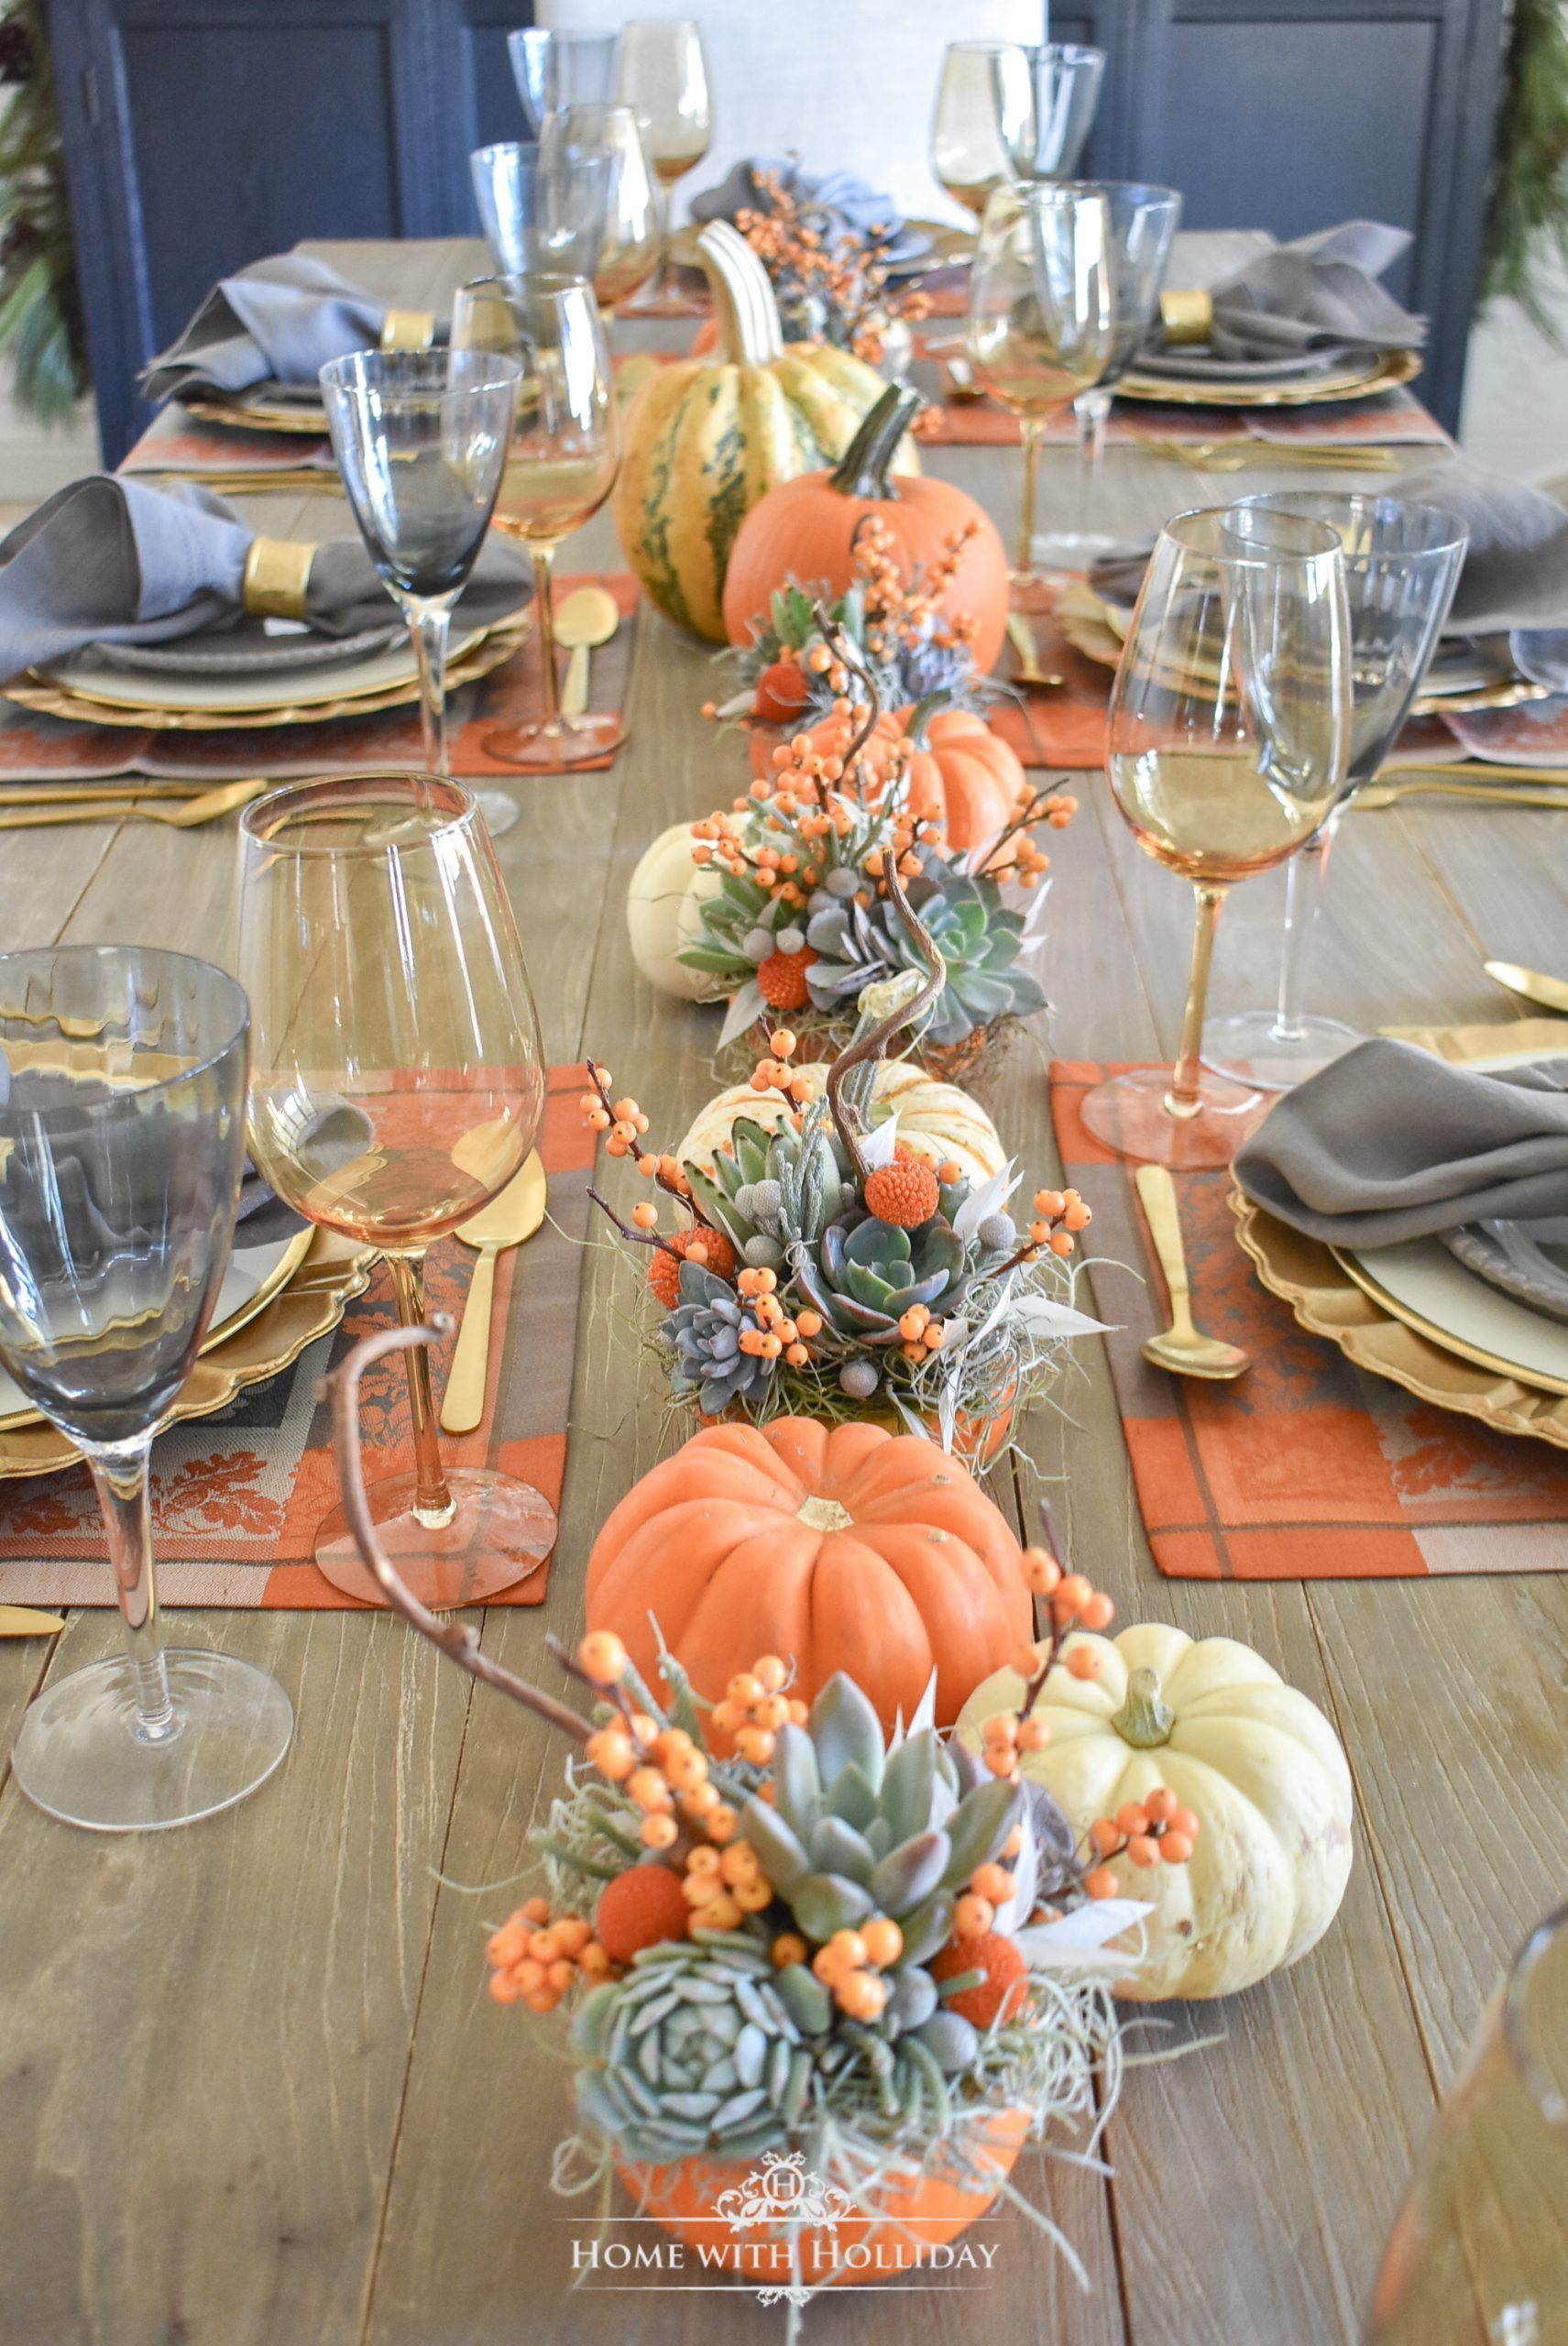 Home with Holliday's Top 10 Posts of 2019! - Home with Holliday - Home with Holliday's Top 10 Posts of 2019! - Home with Holliday -   15 thanksgiving decorations table ideas